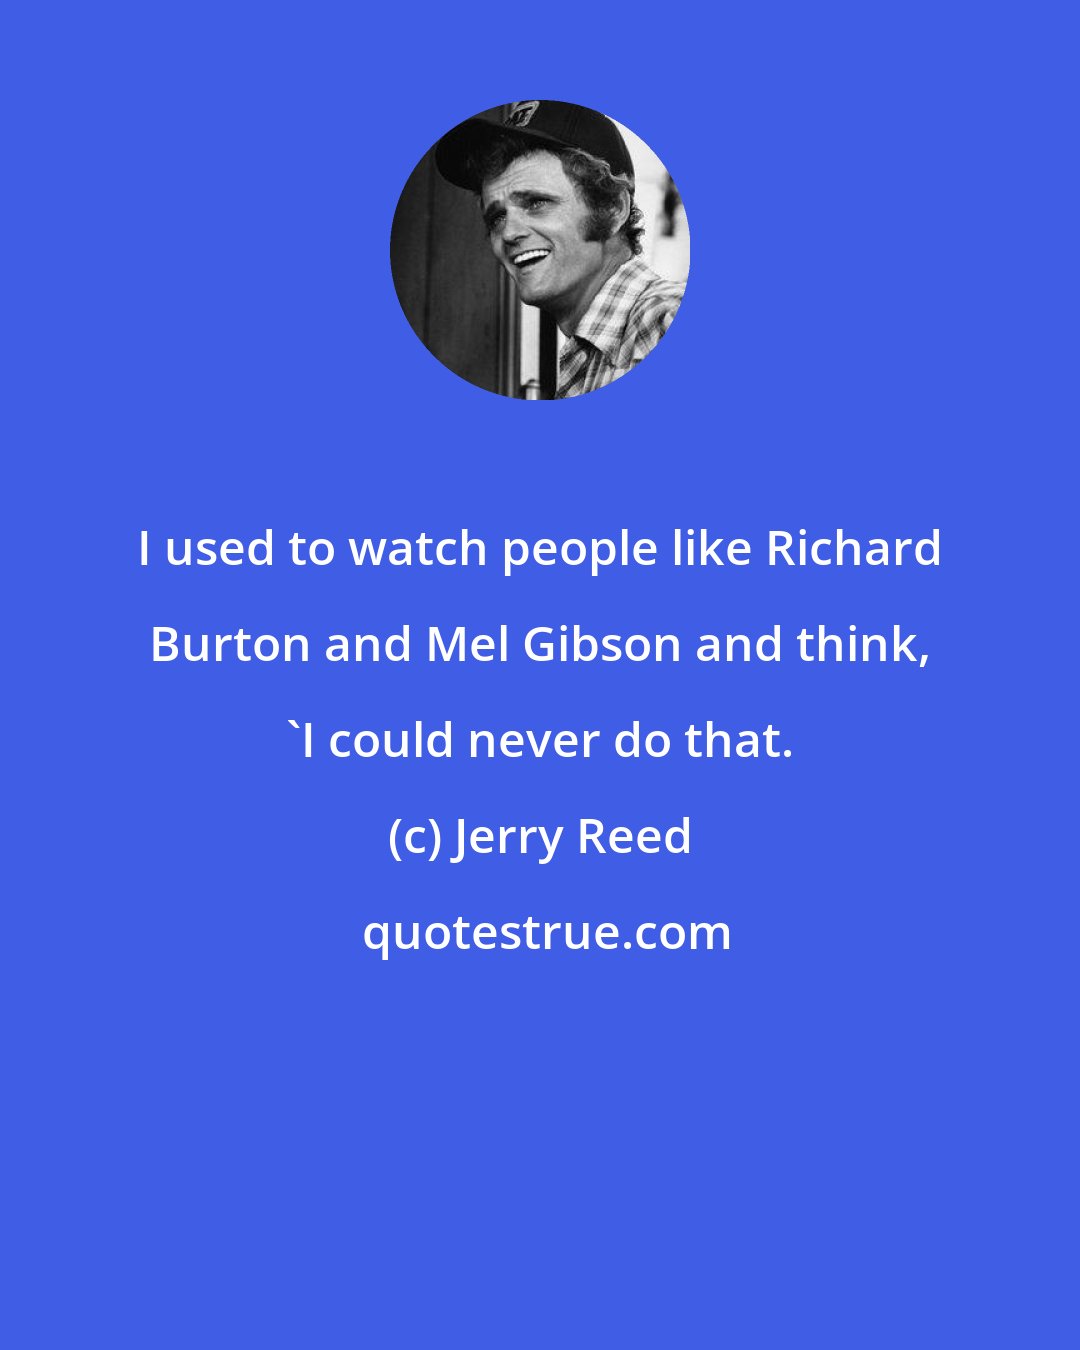 Jerry Reed: I used to watch people like Richard Burton and Mel Gibson and think, 'I could never do that.